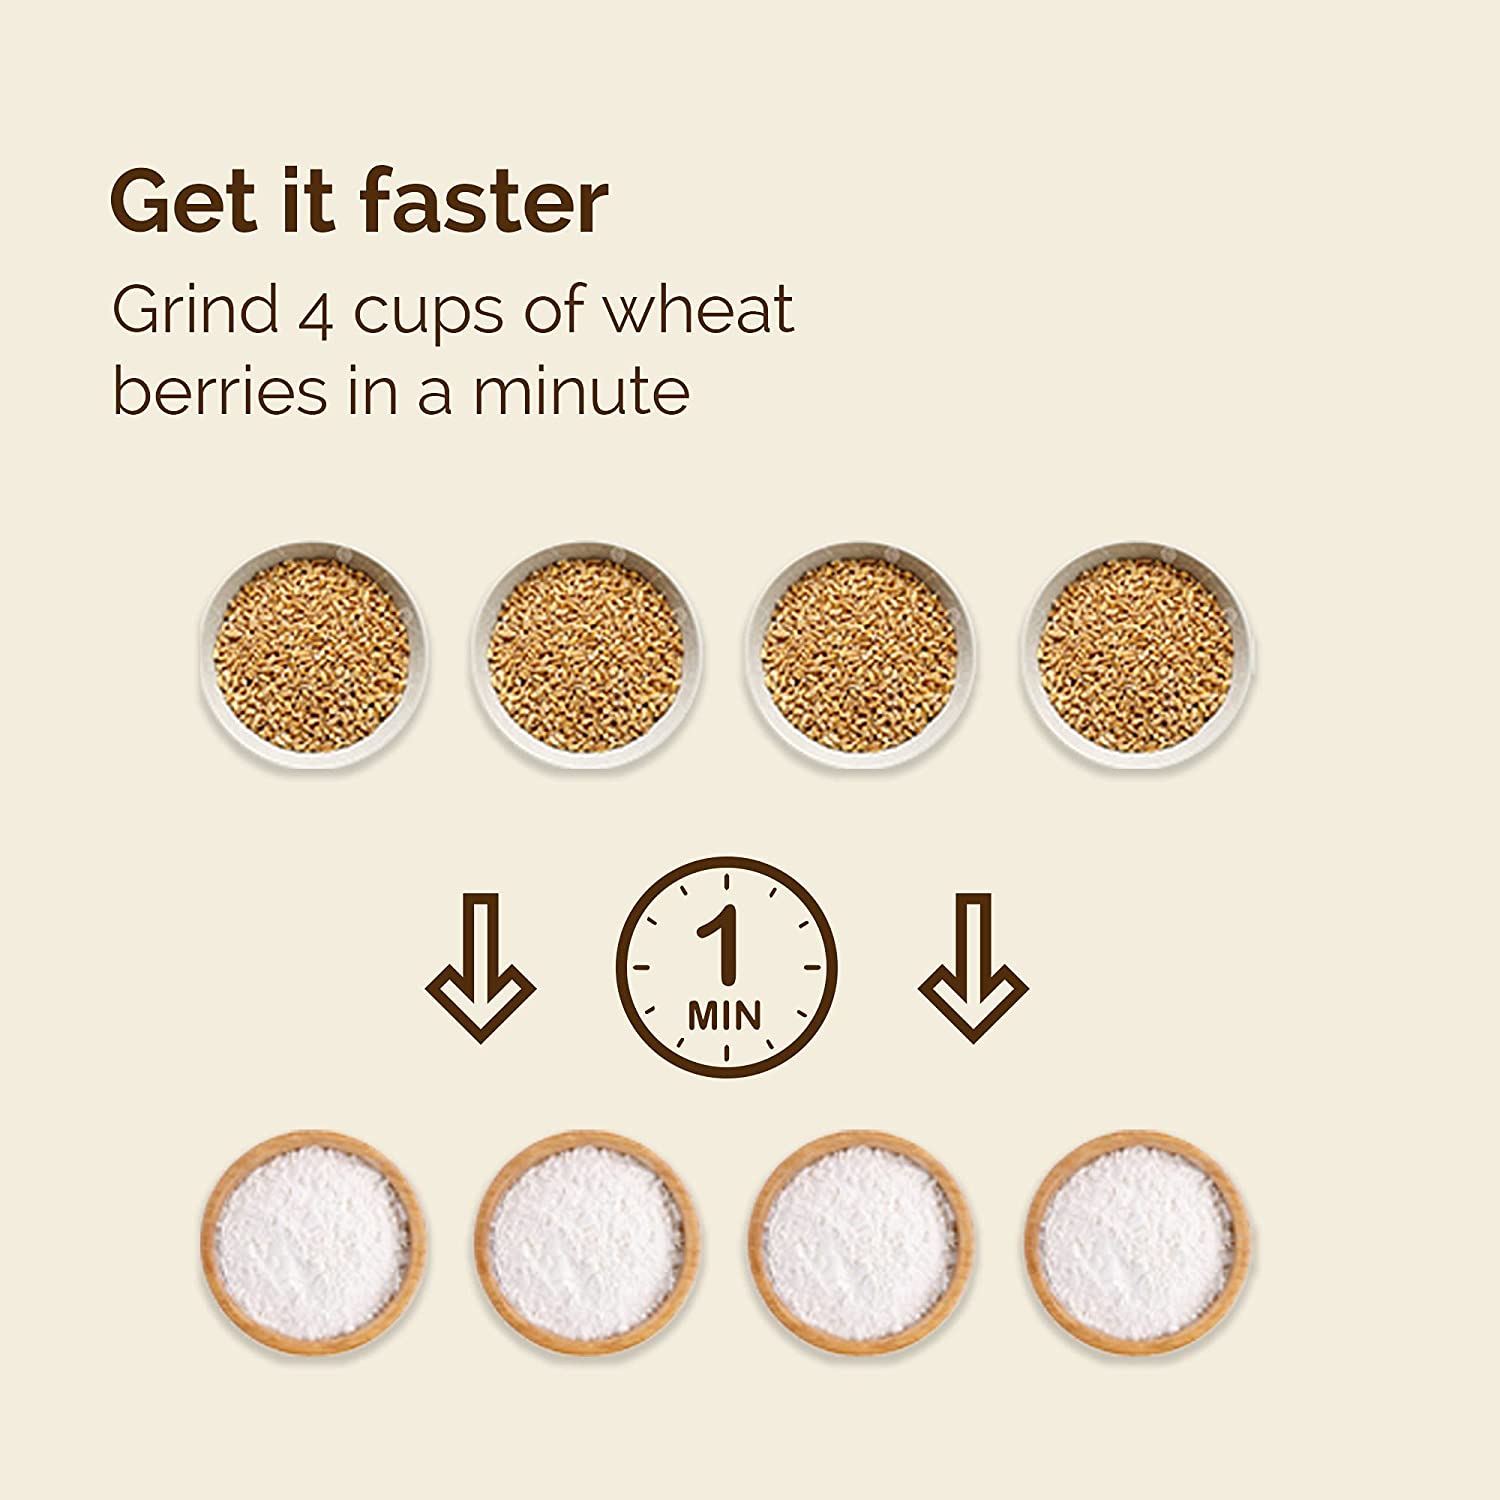 Get it faster with the Wonder Mill Grinder Electric- (SHIPS IN 1-2 WEEKS) grind 4 cups of wheat berries in a minute.